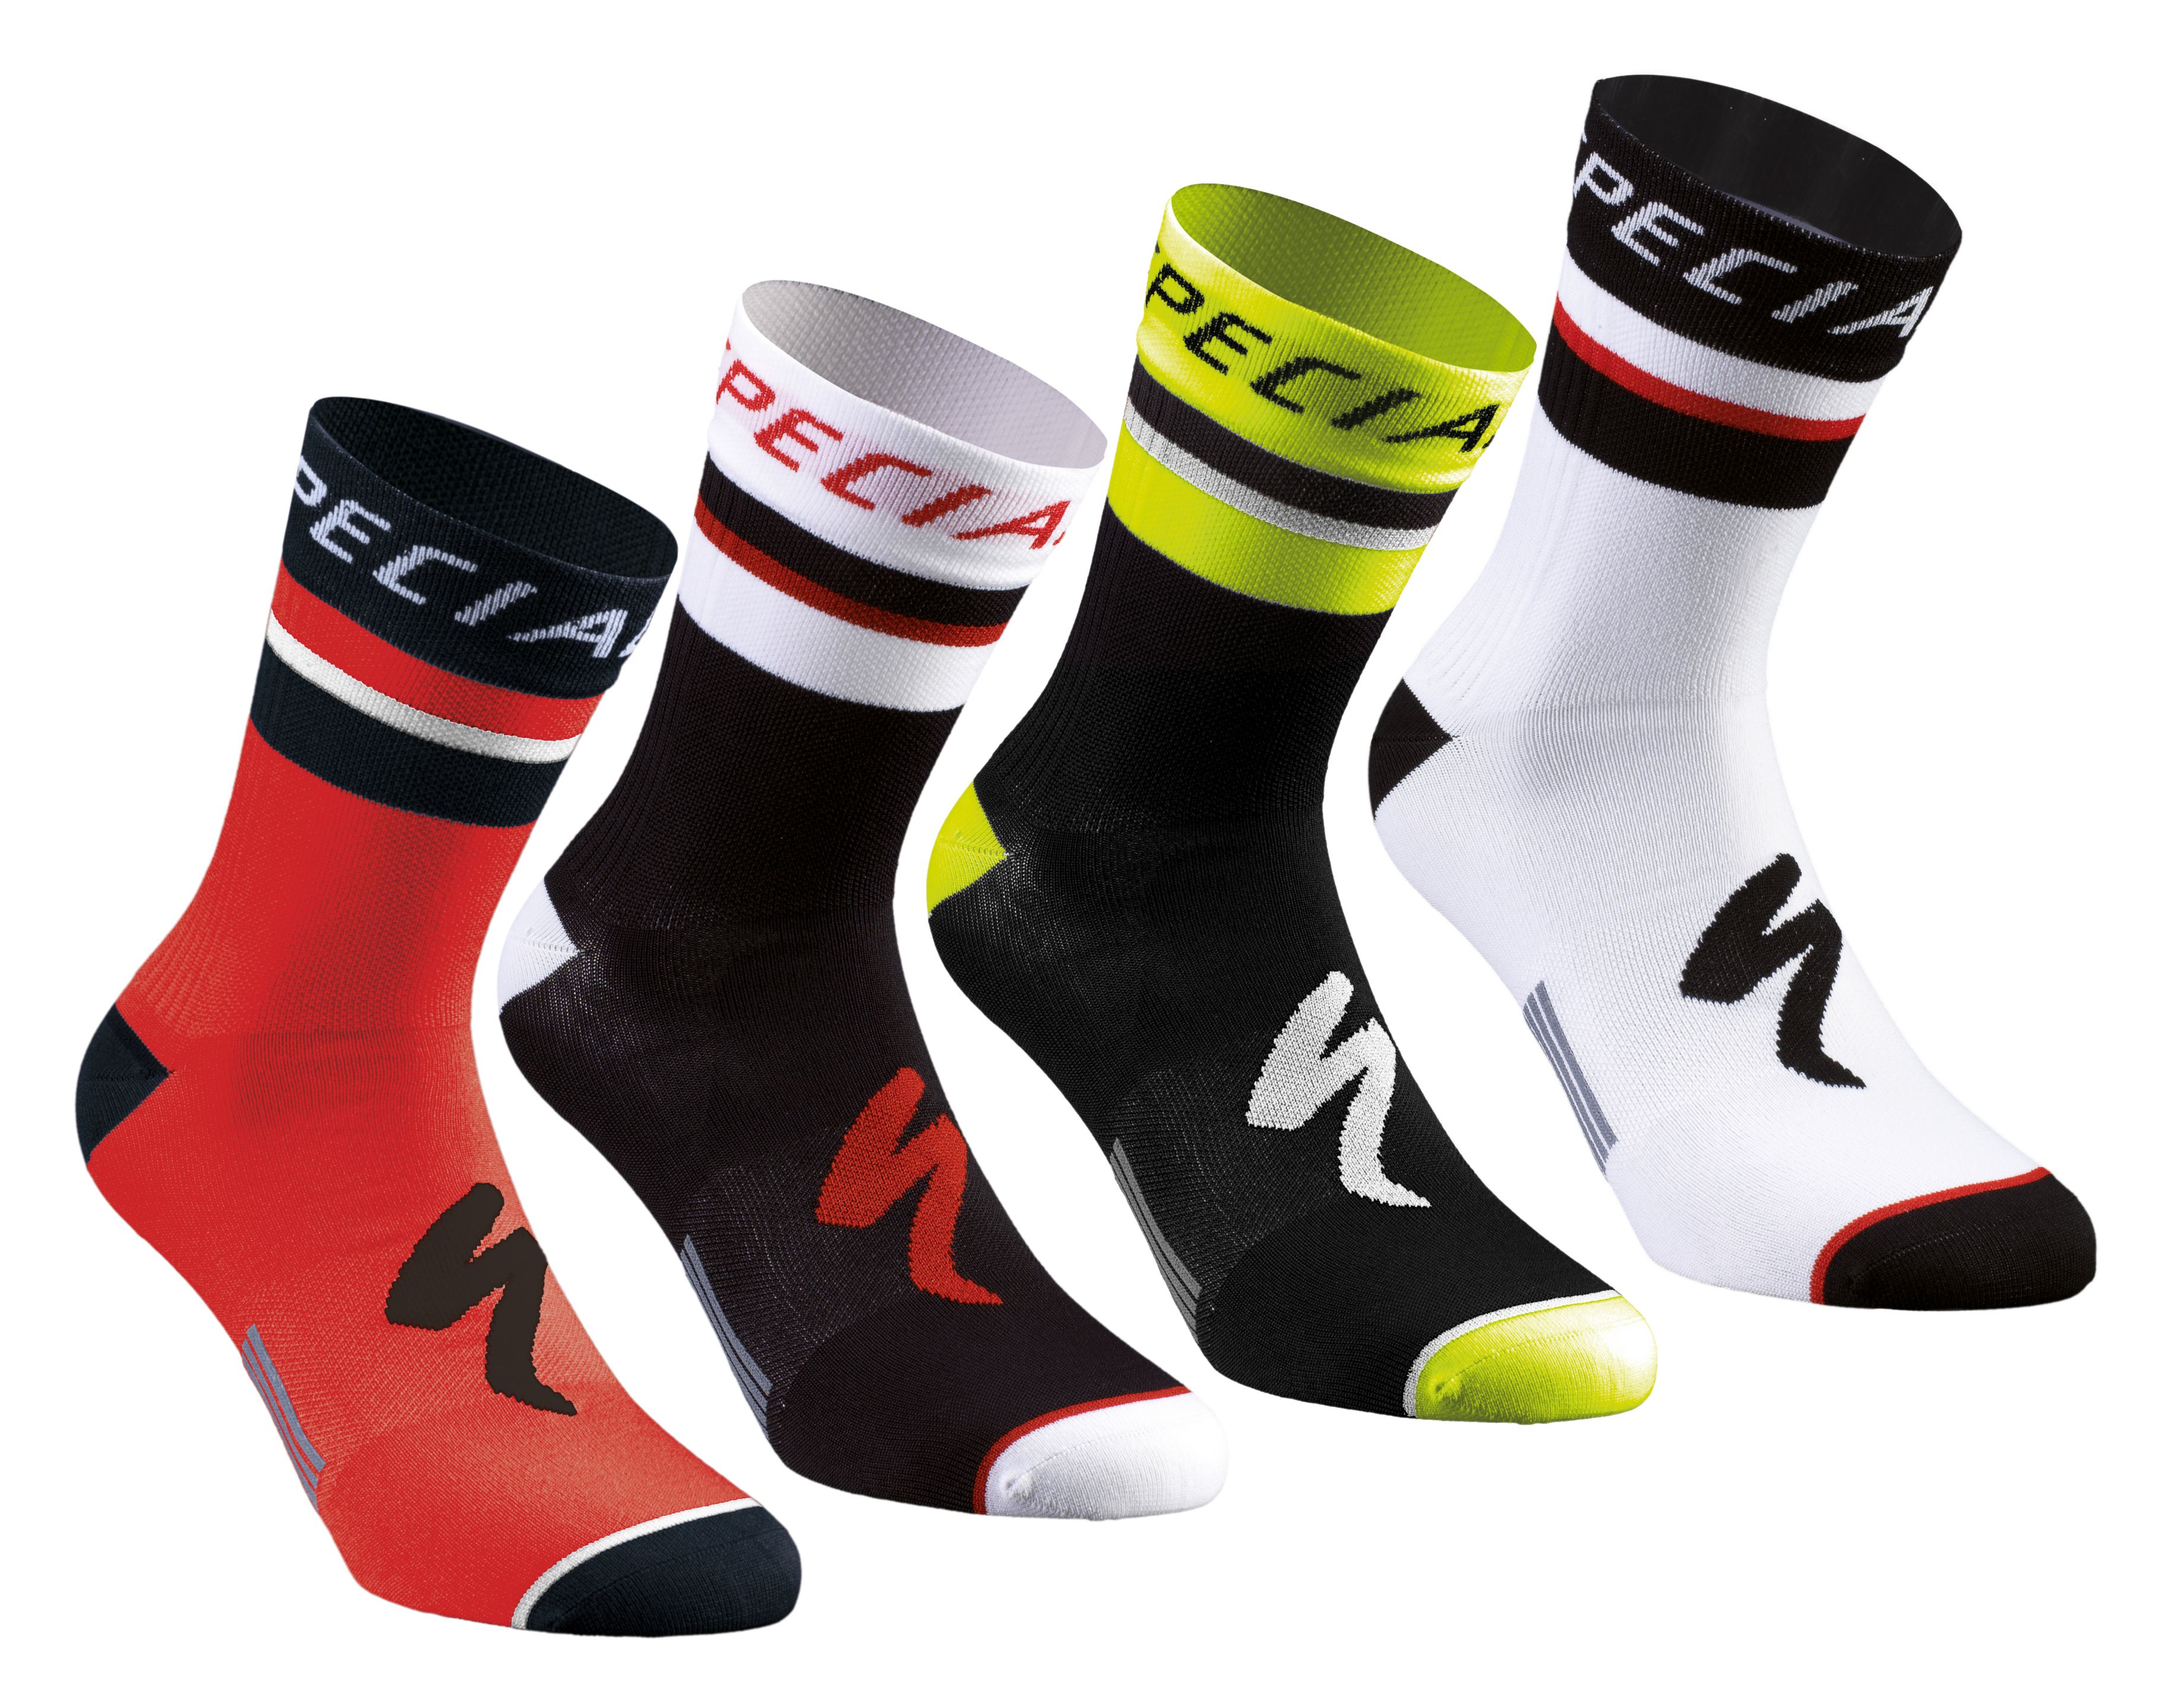 Specialized Rbx Comp Logo Summer Sock 2019 - £9.99 | Socks | Cyclestore